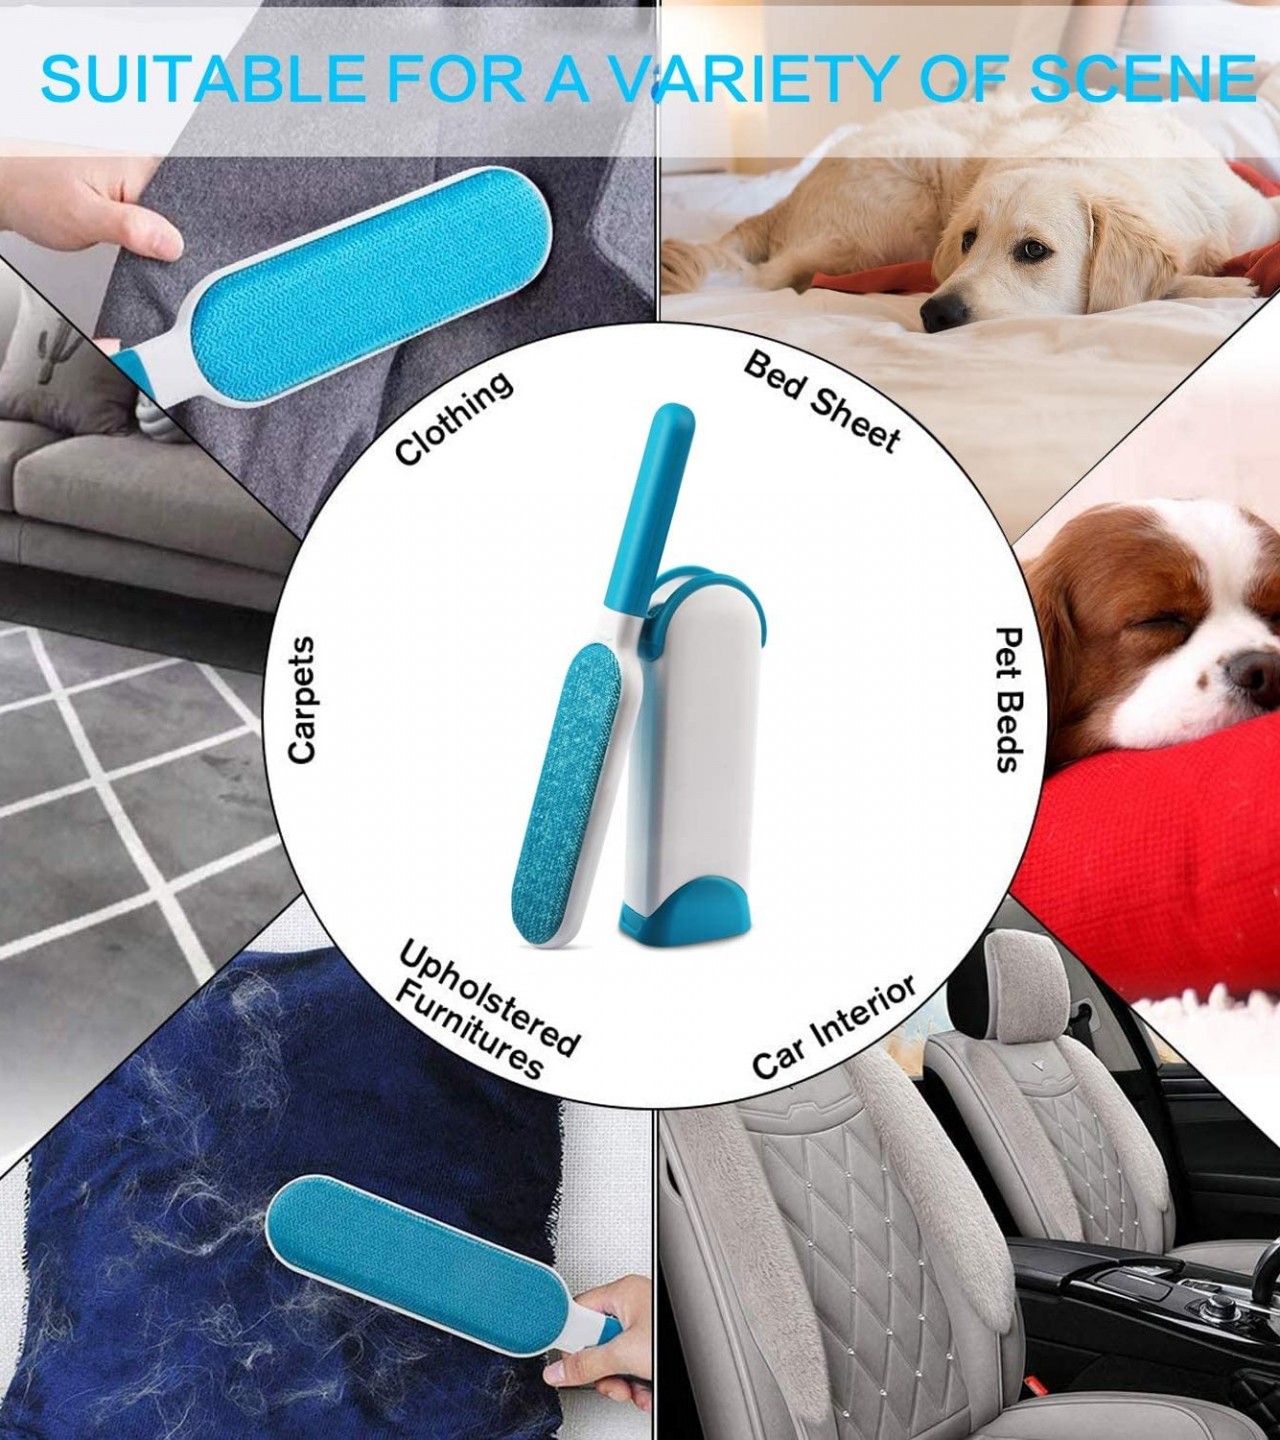 Pet Hair Remover -Dog Hair Remover For Clothes-Better Than Lint Rollers For  Pet Hair, Dog Hair Remover- Lint Remover Brush Remove Cat And Dog Hair,  Lint From Clothing, Couch, Furniture, Bedding |